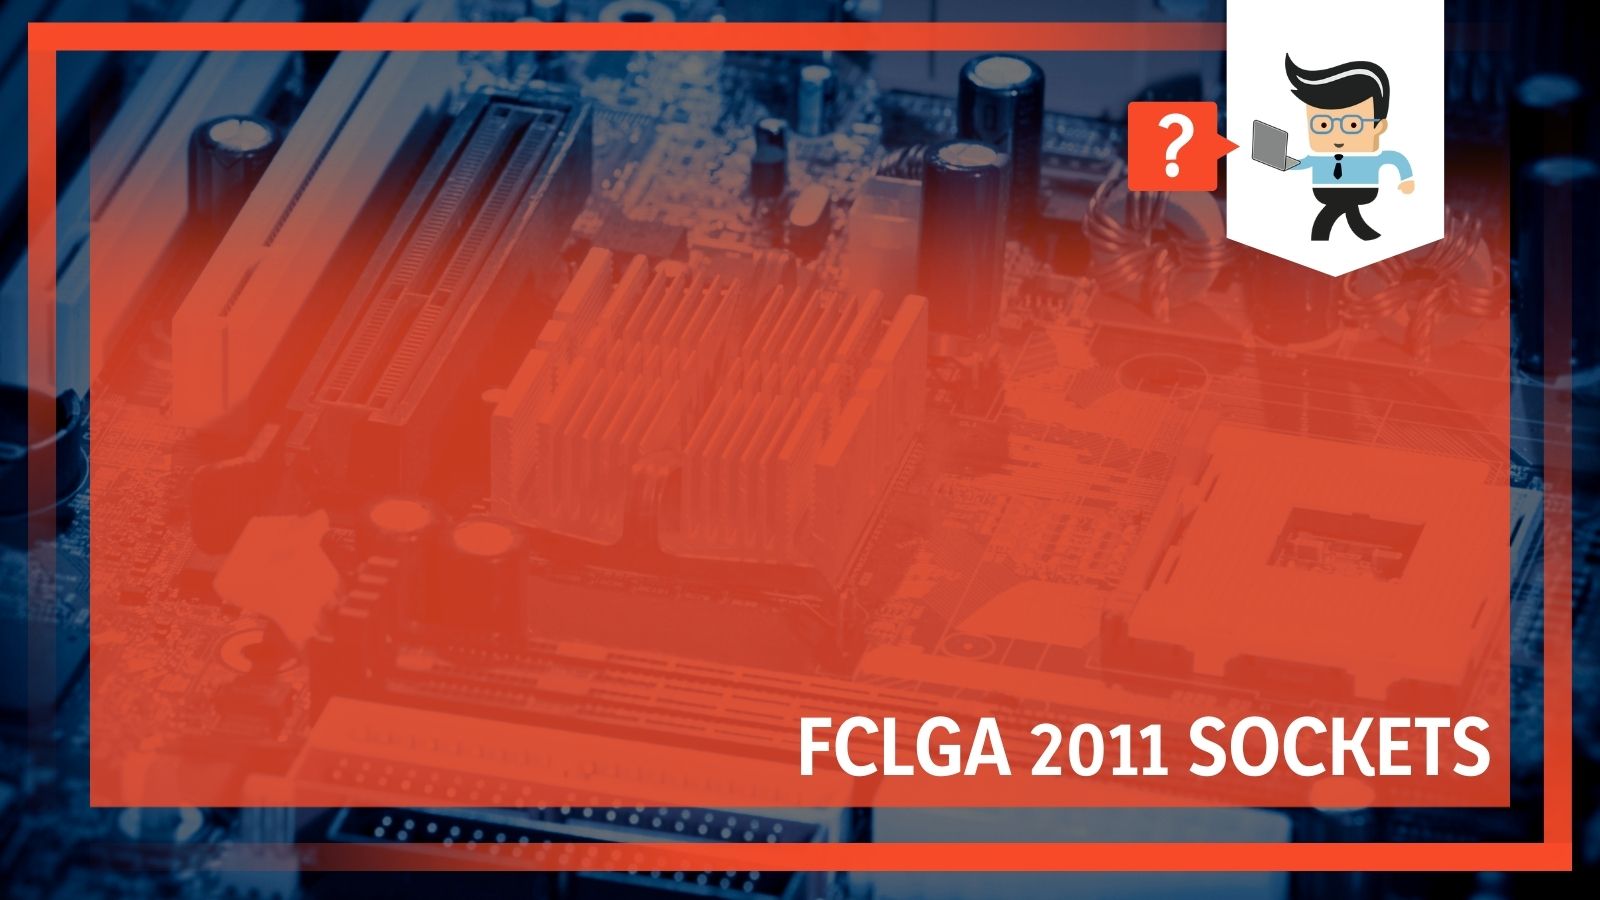 FCLGA 2011 Sockets - All You Need To Know About Compatible Motherboards & Chipsets